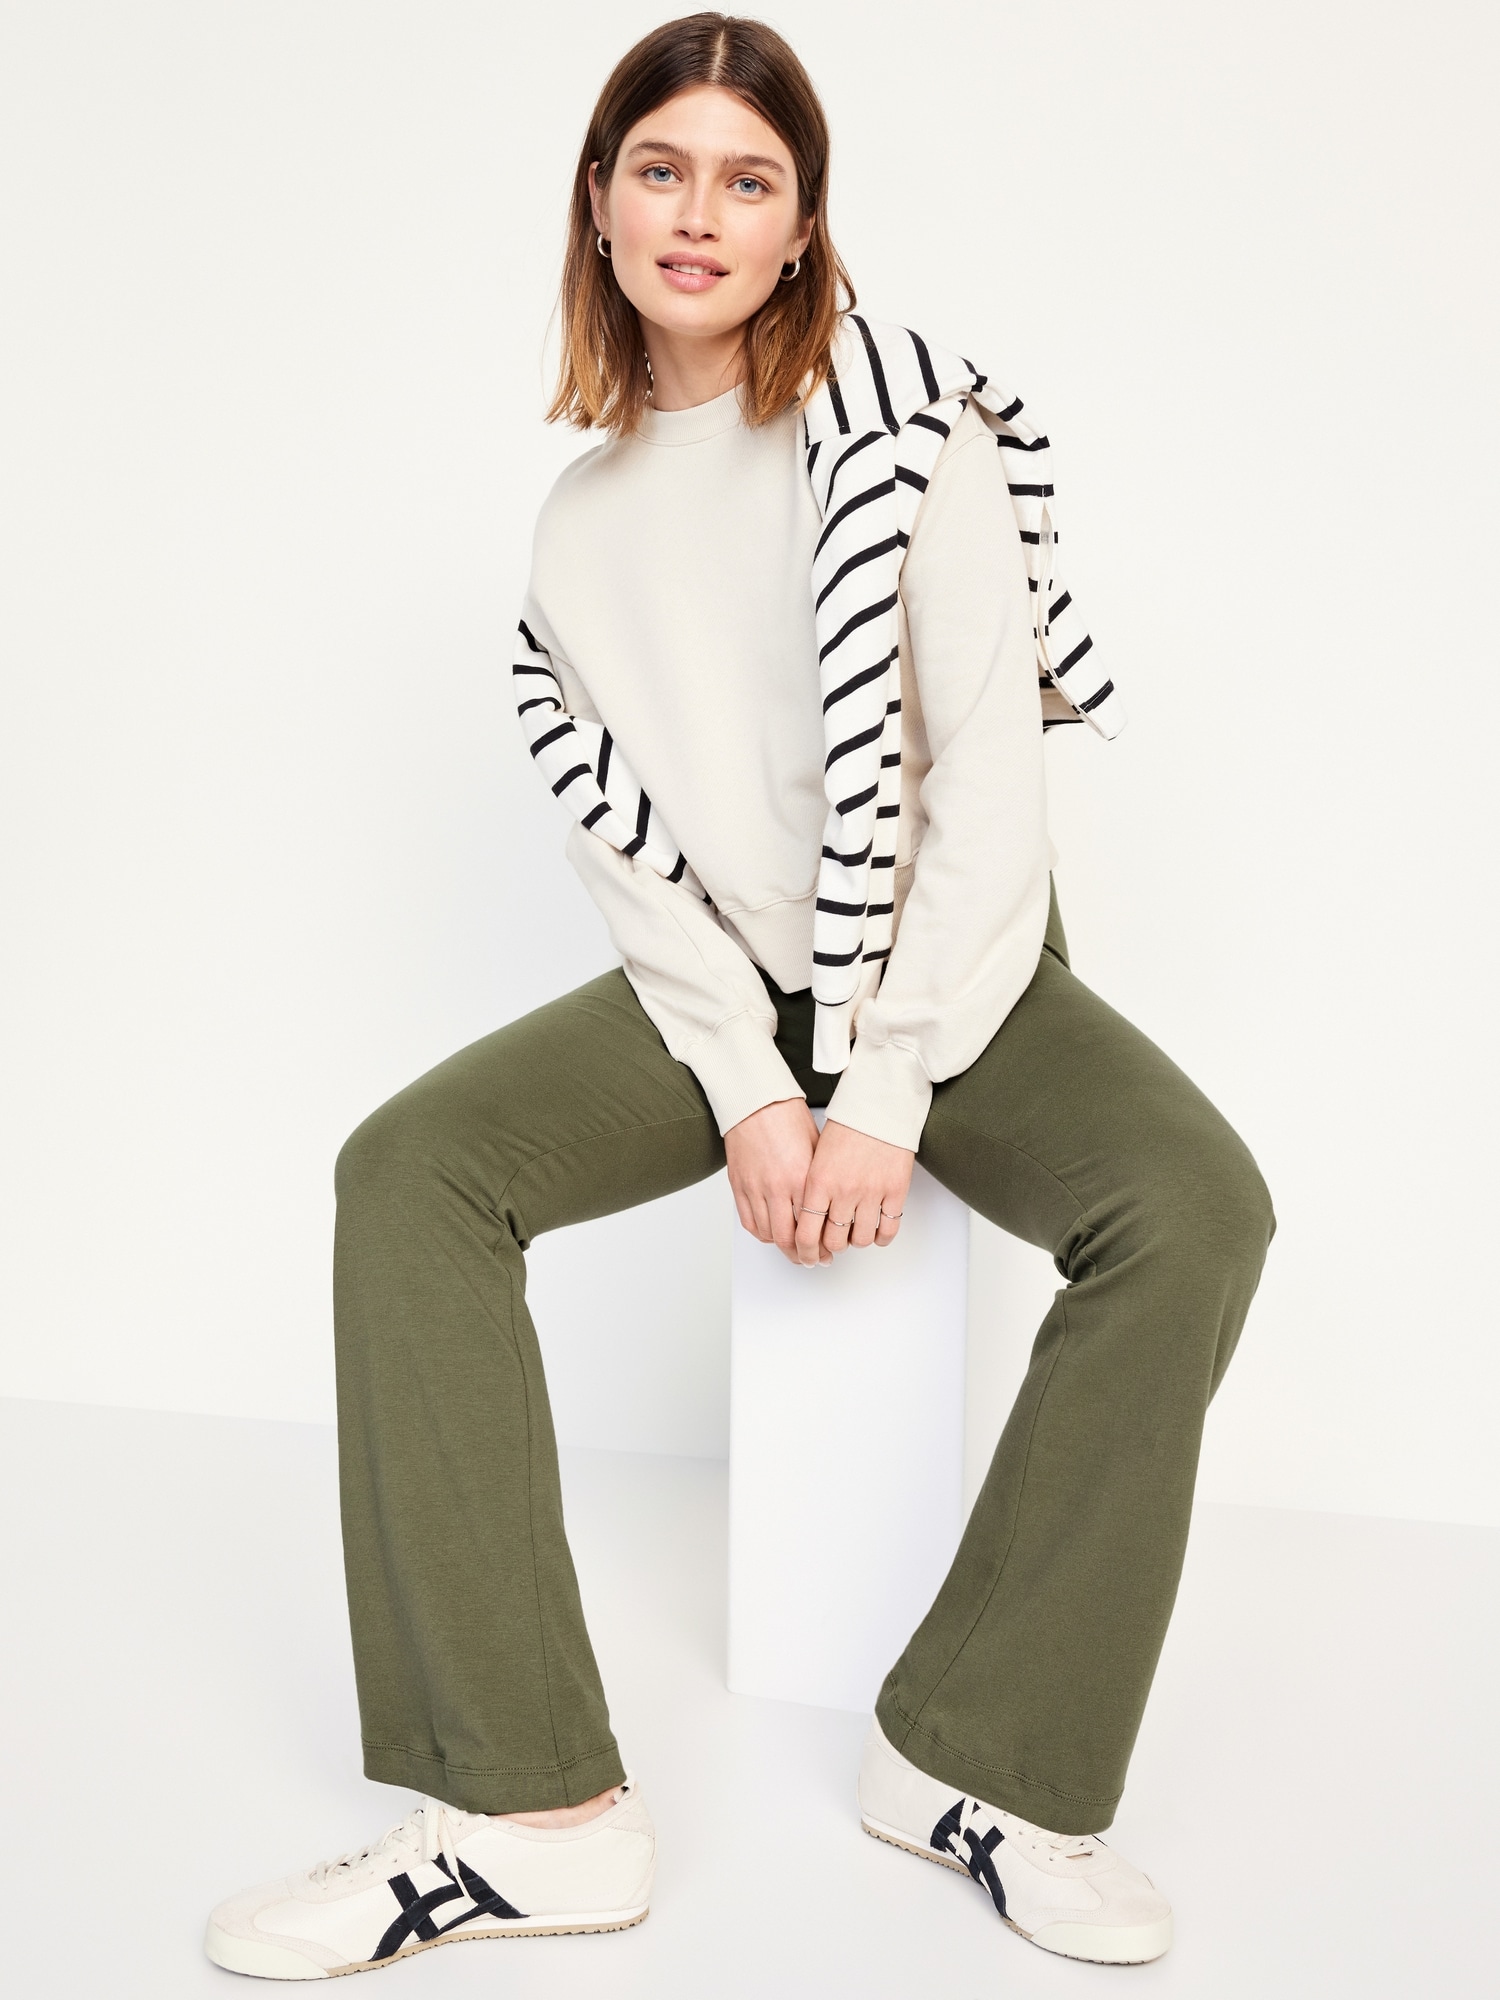 Active Wear, H&M Flared Ribbed Leggings For Women